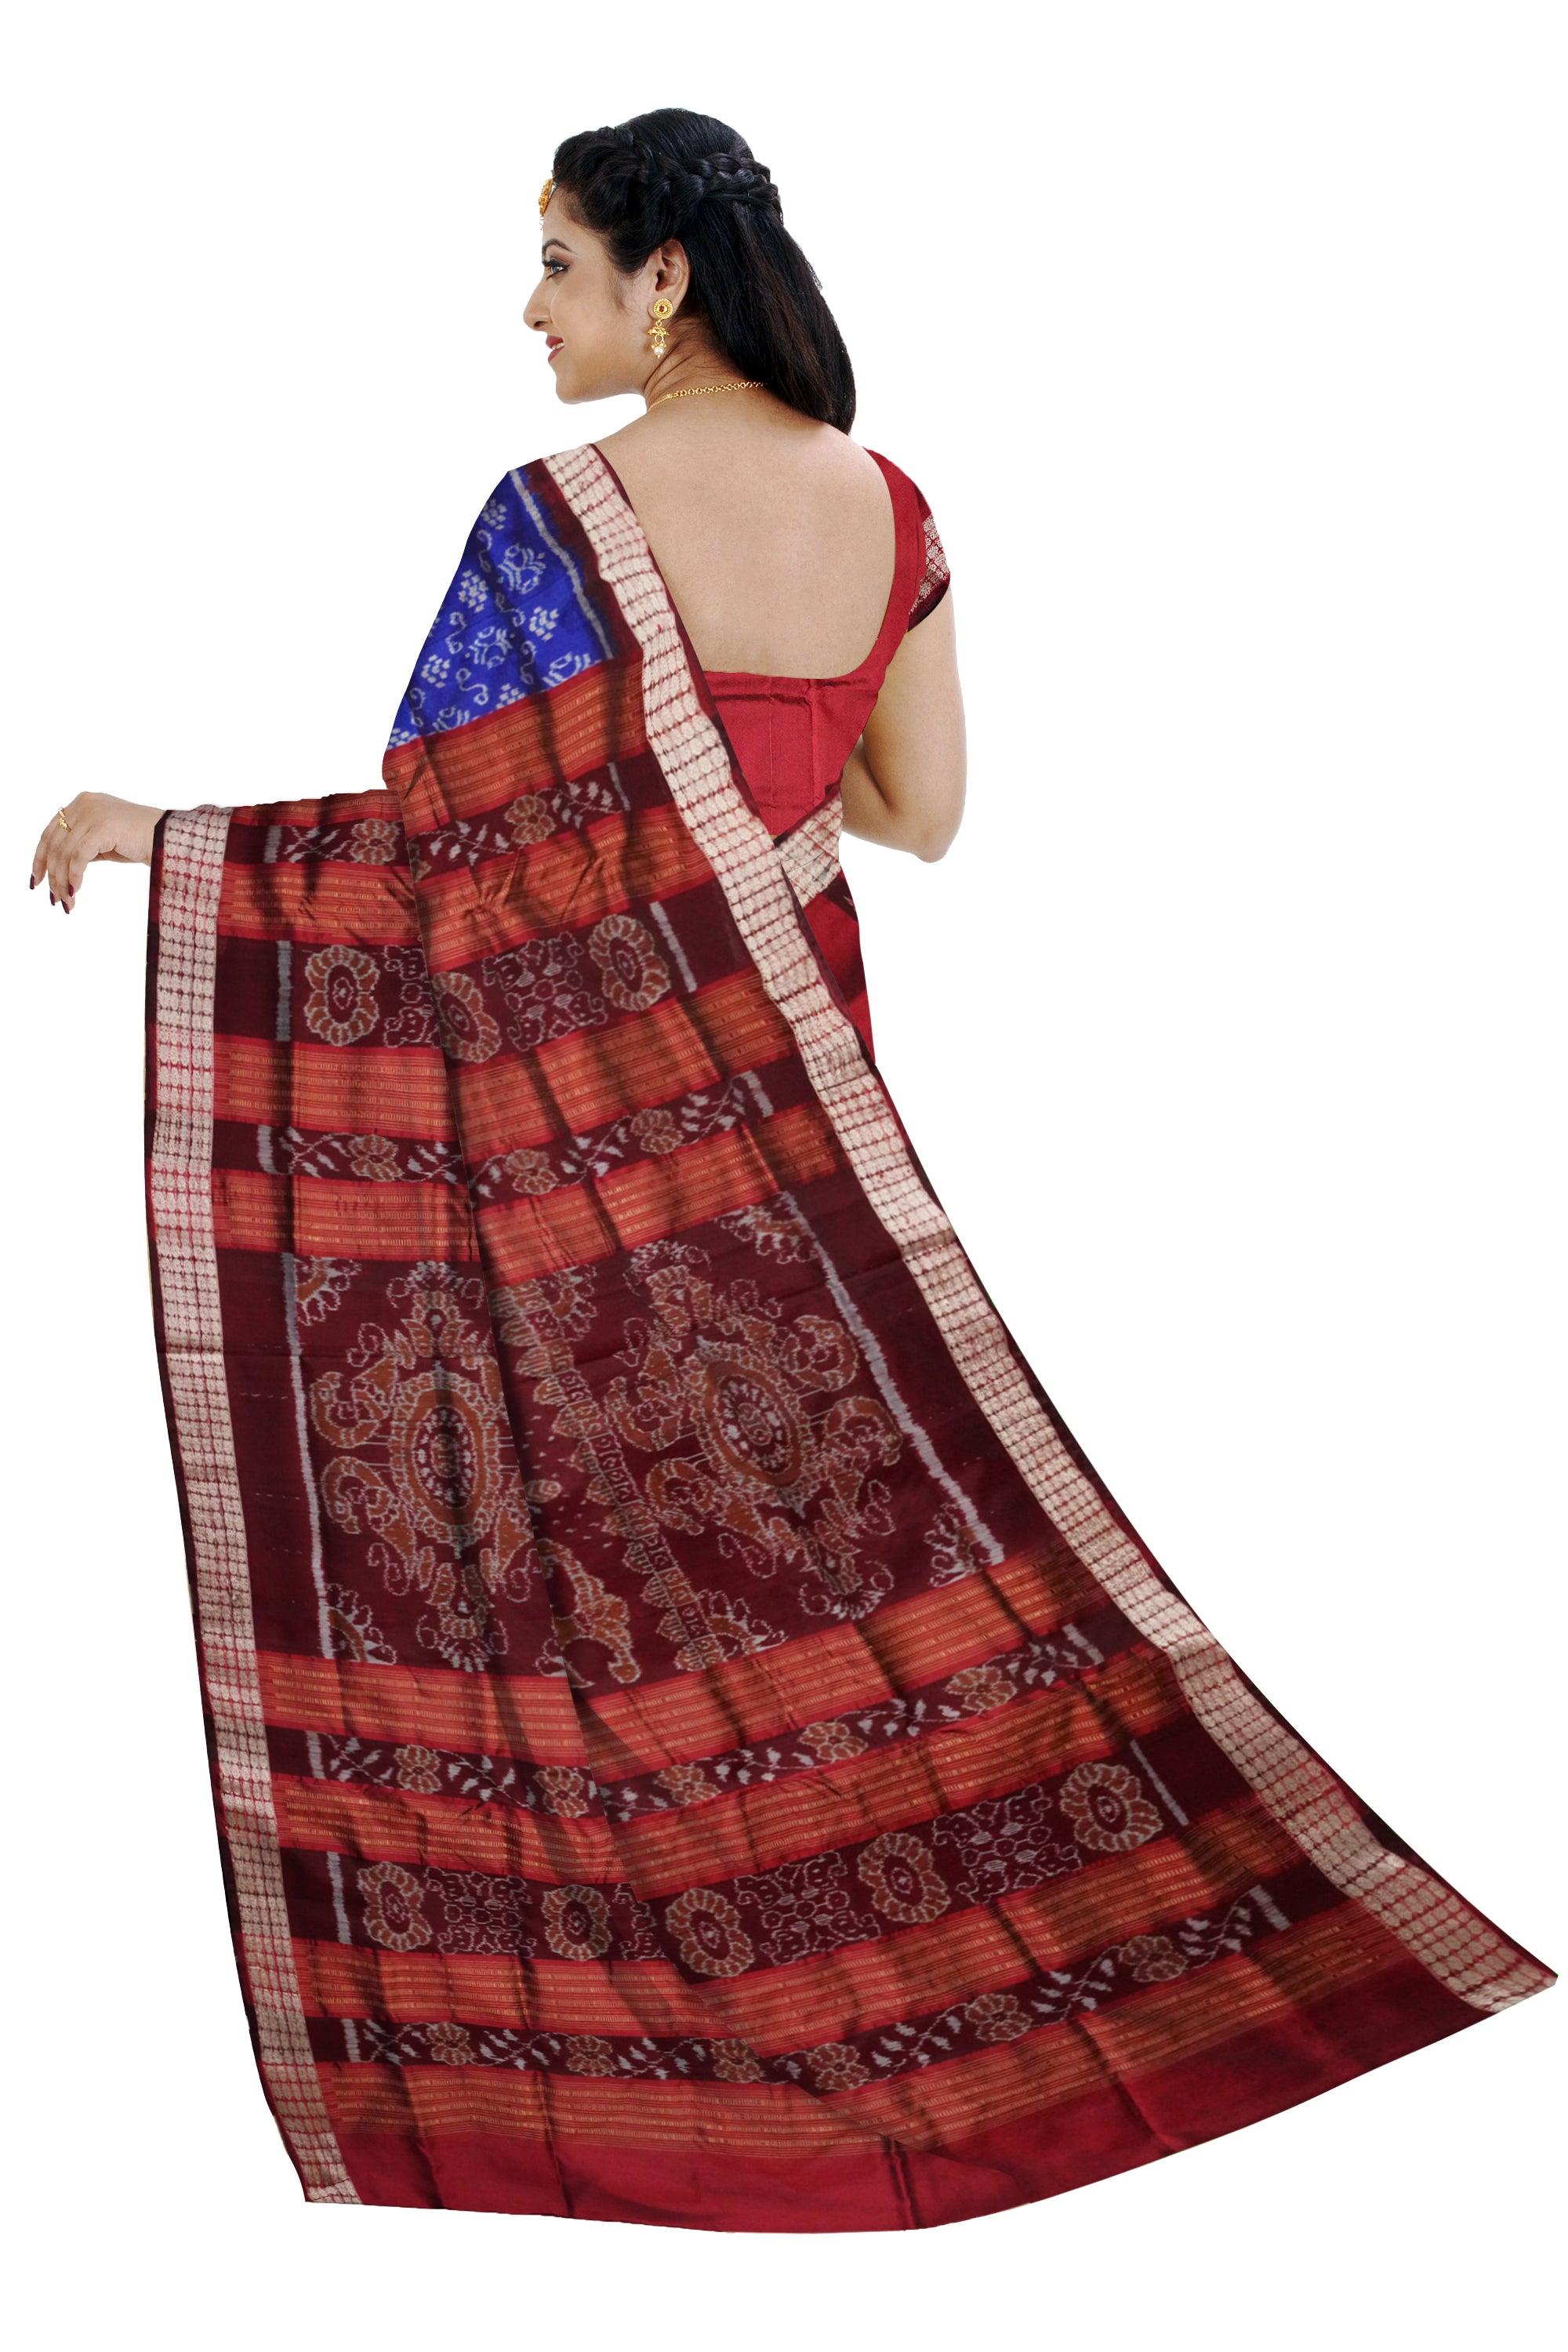 Small pasapali with terracotta pattern patli design pata saree in blue and maroon color. - Koshali Arts & Crafts Enterprise